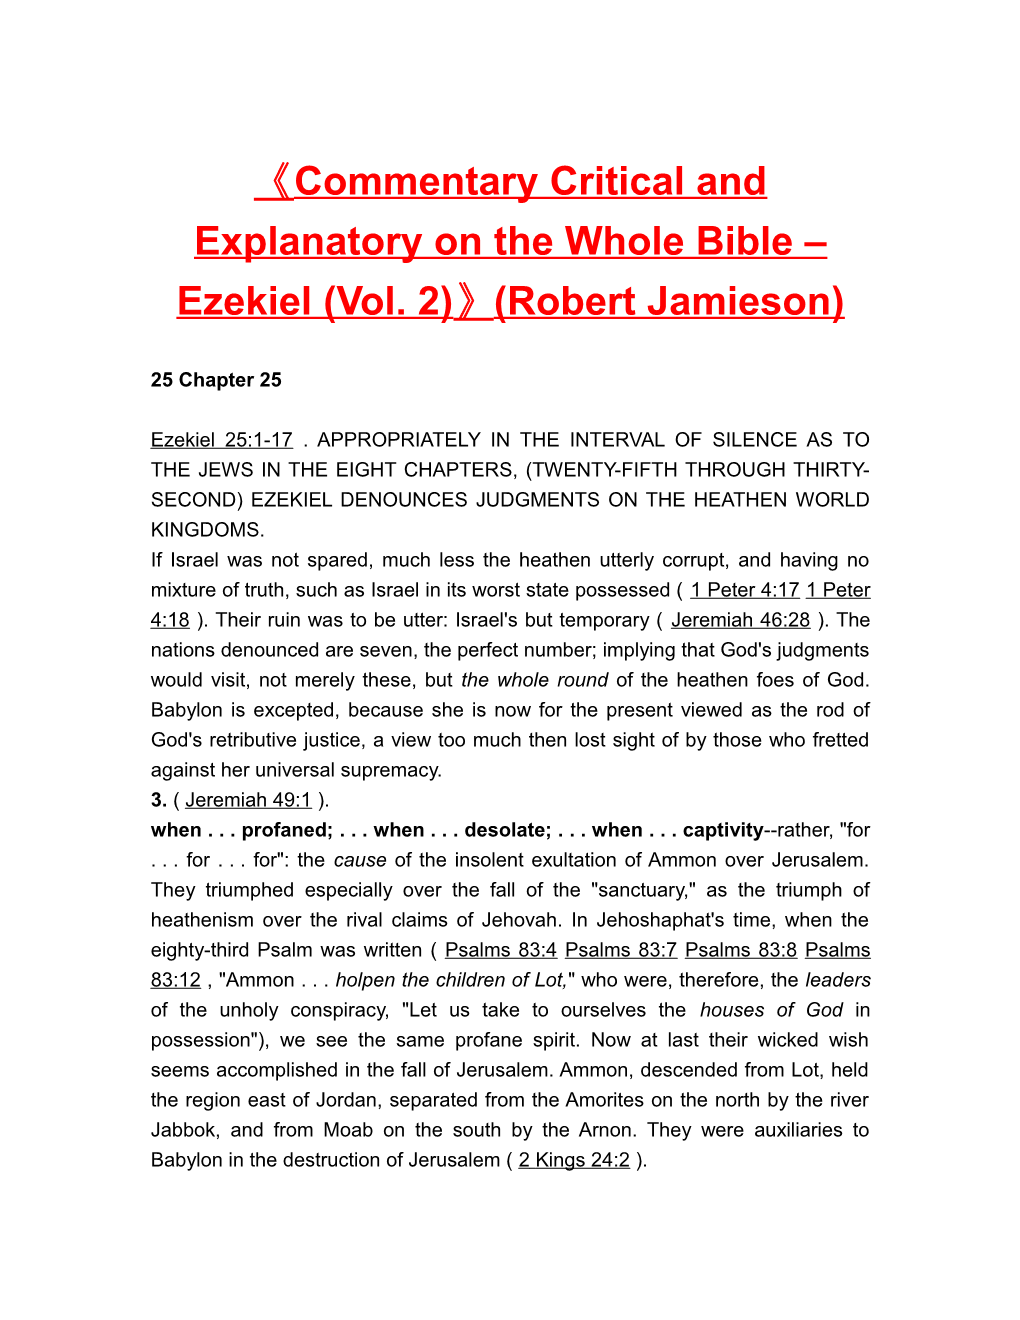 Commentary Critical and Explanatory on the Whole Bible Ezekiel (Vol. 2) (Robert Jamieson)